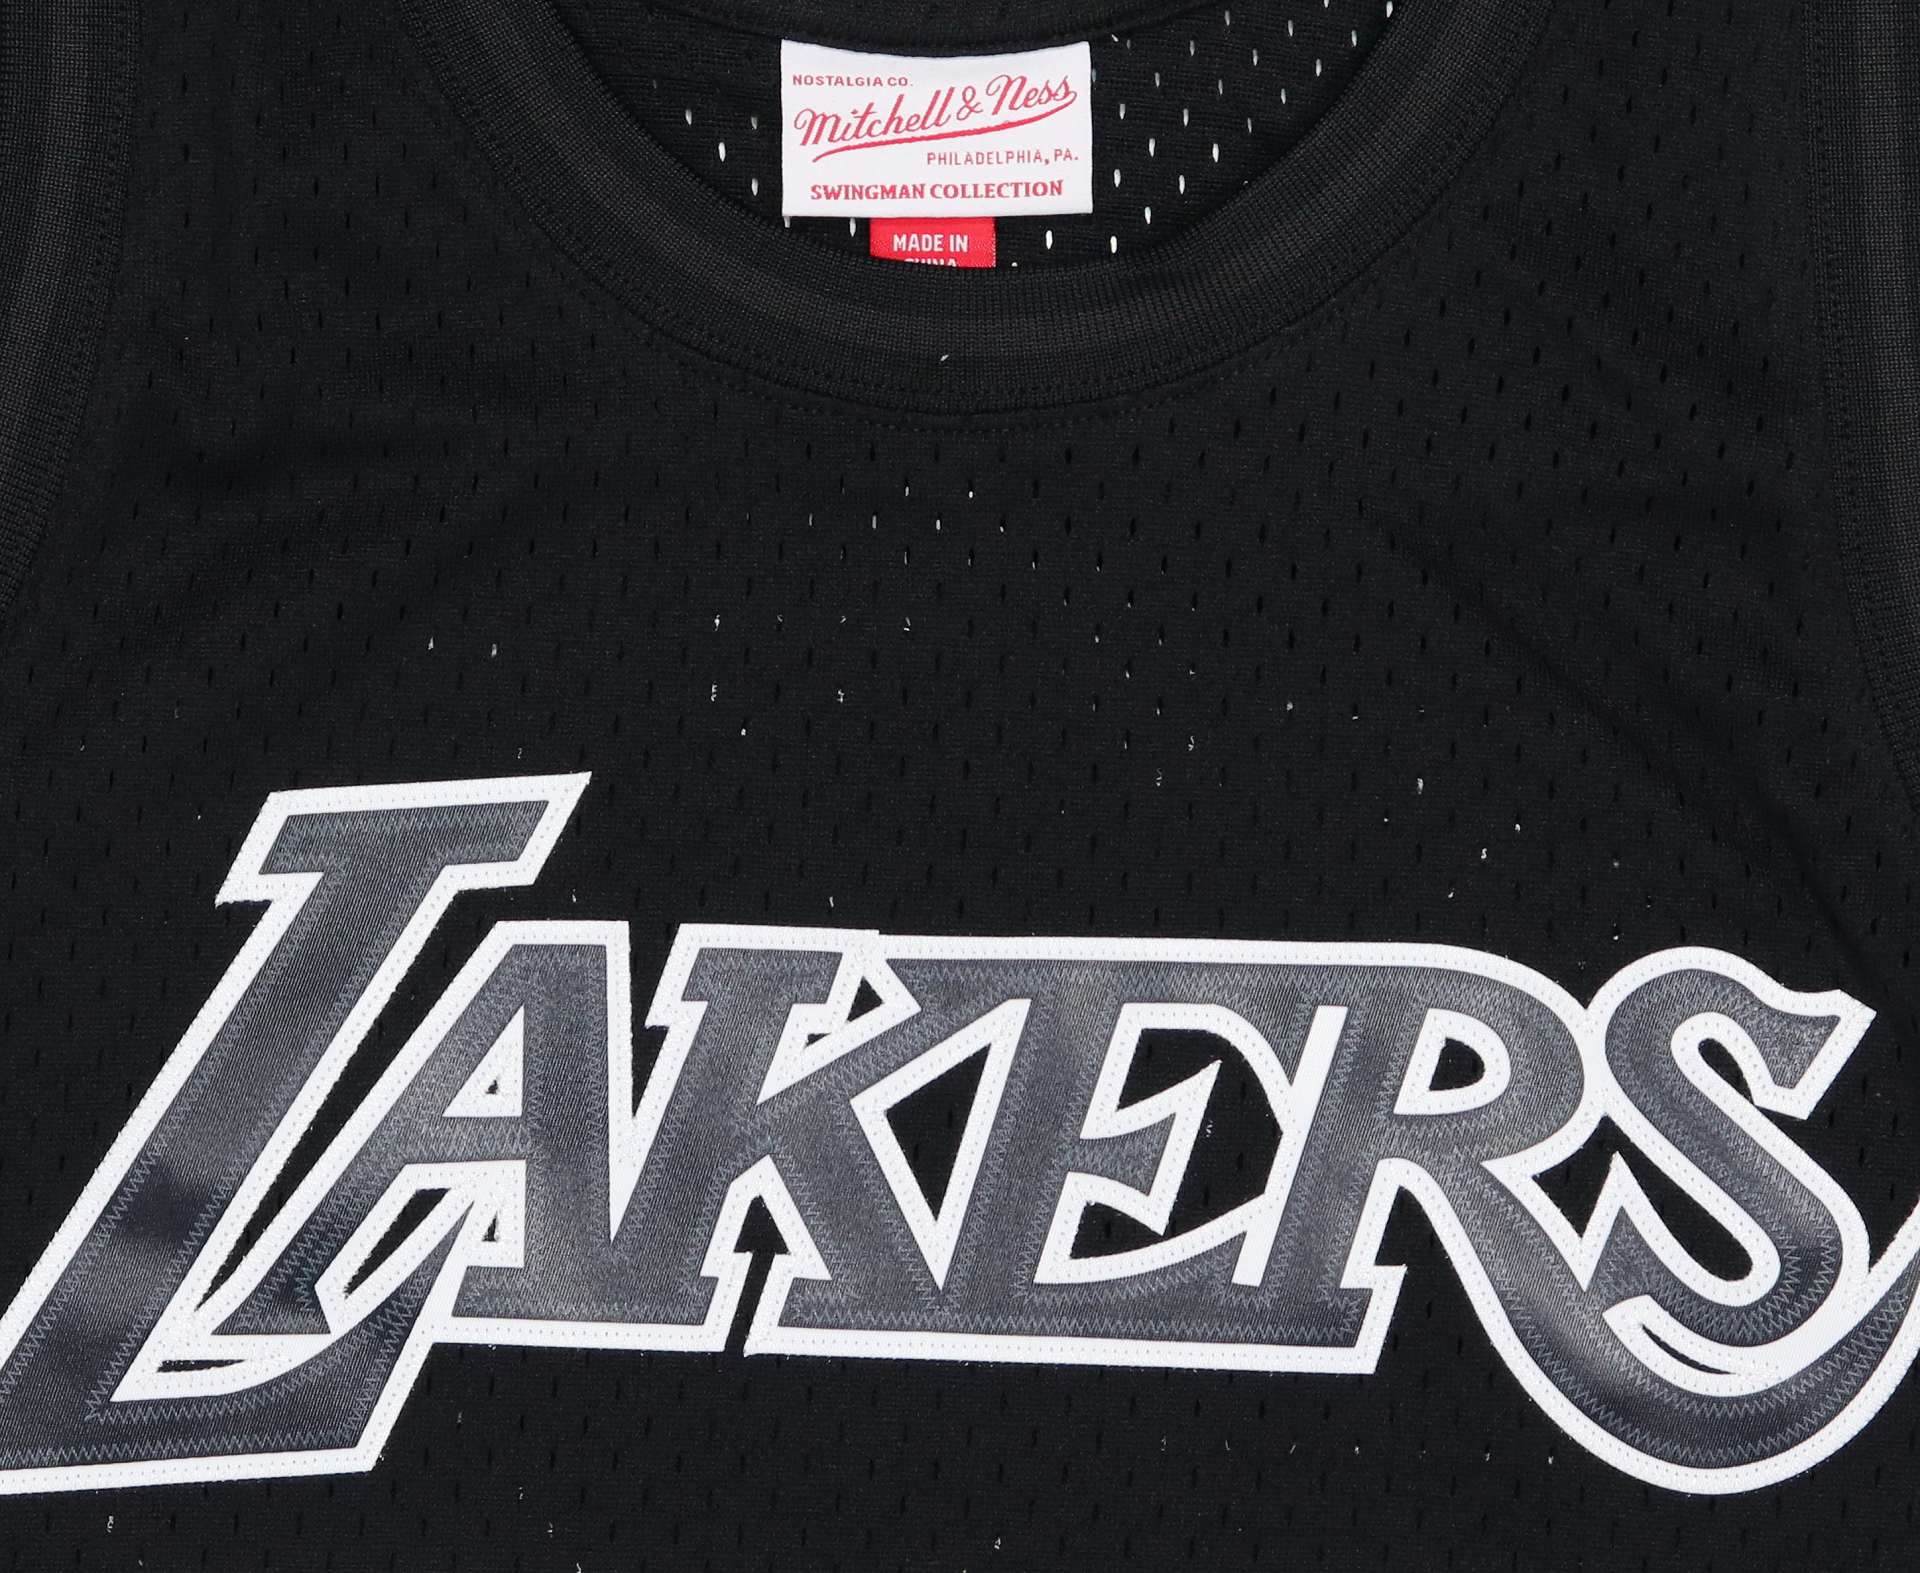 Shaquille ONeal #34 Los Angeles Lakers NBA White Logo Swingman Jersey Mitchell & Ness